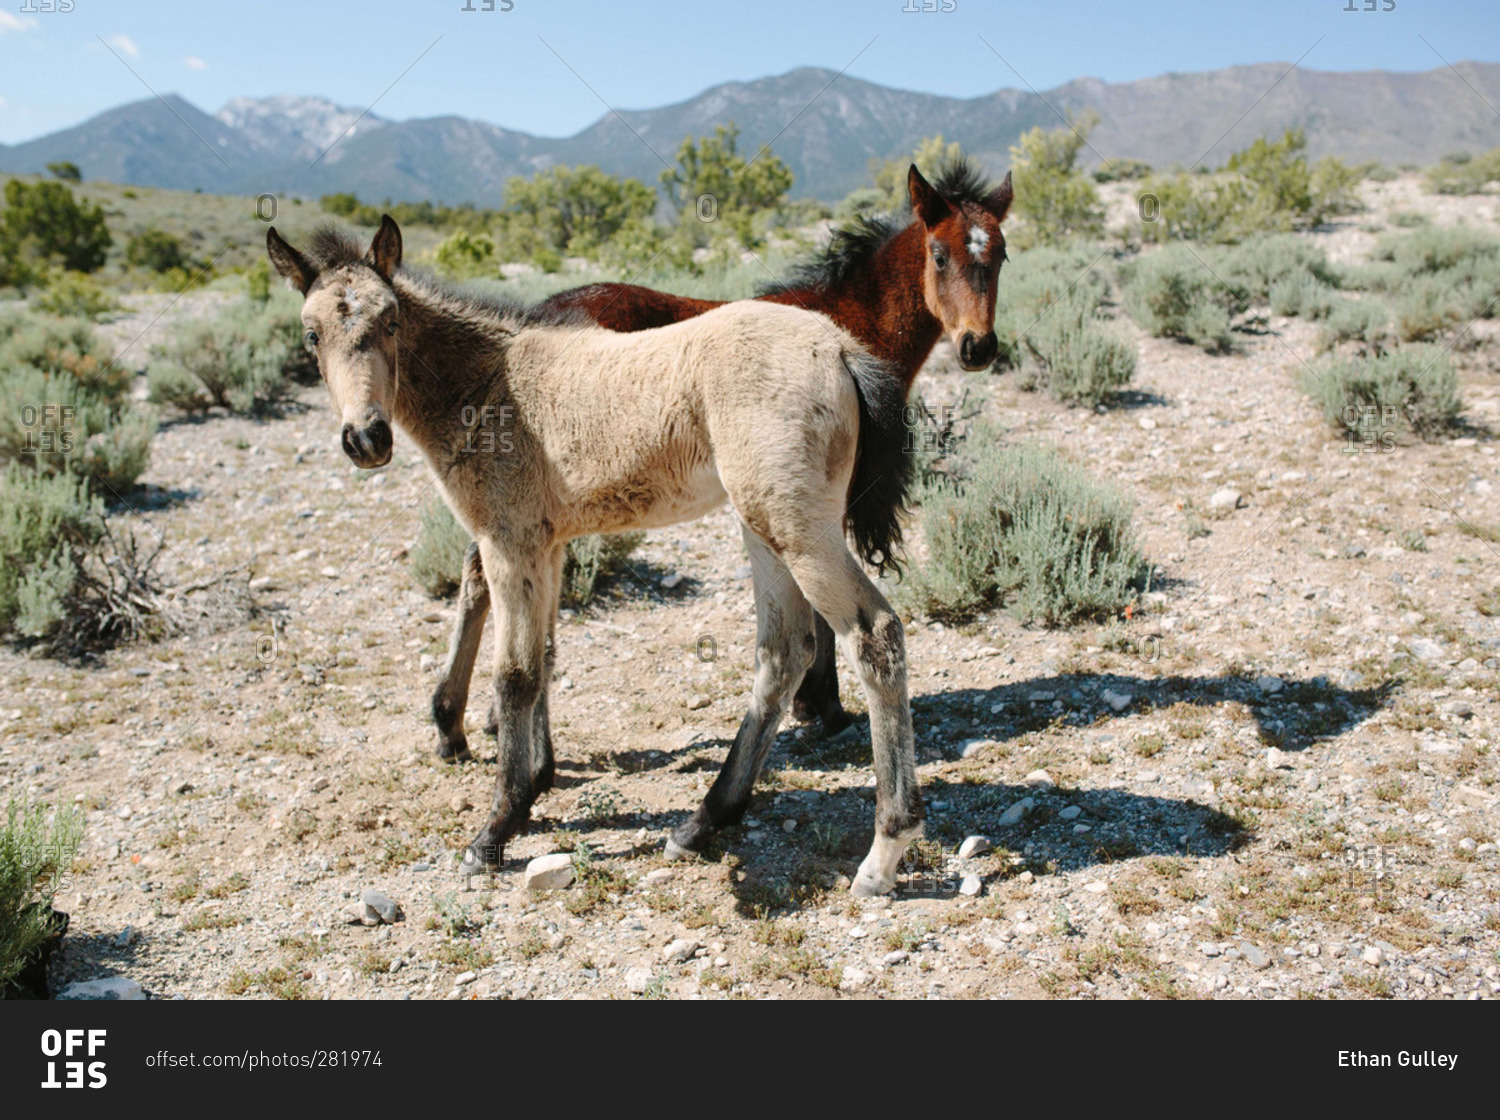 Light and dark colored foals stand in desert landscape